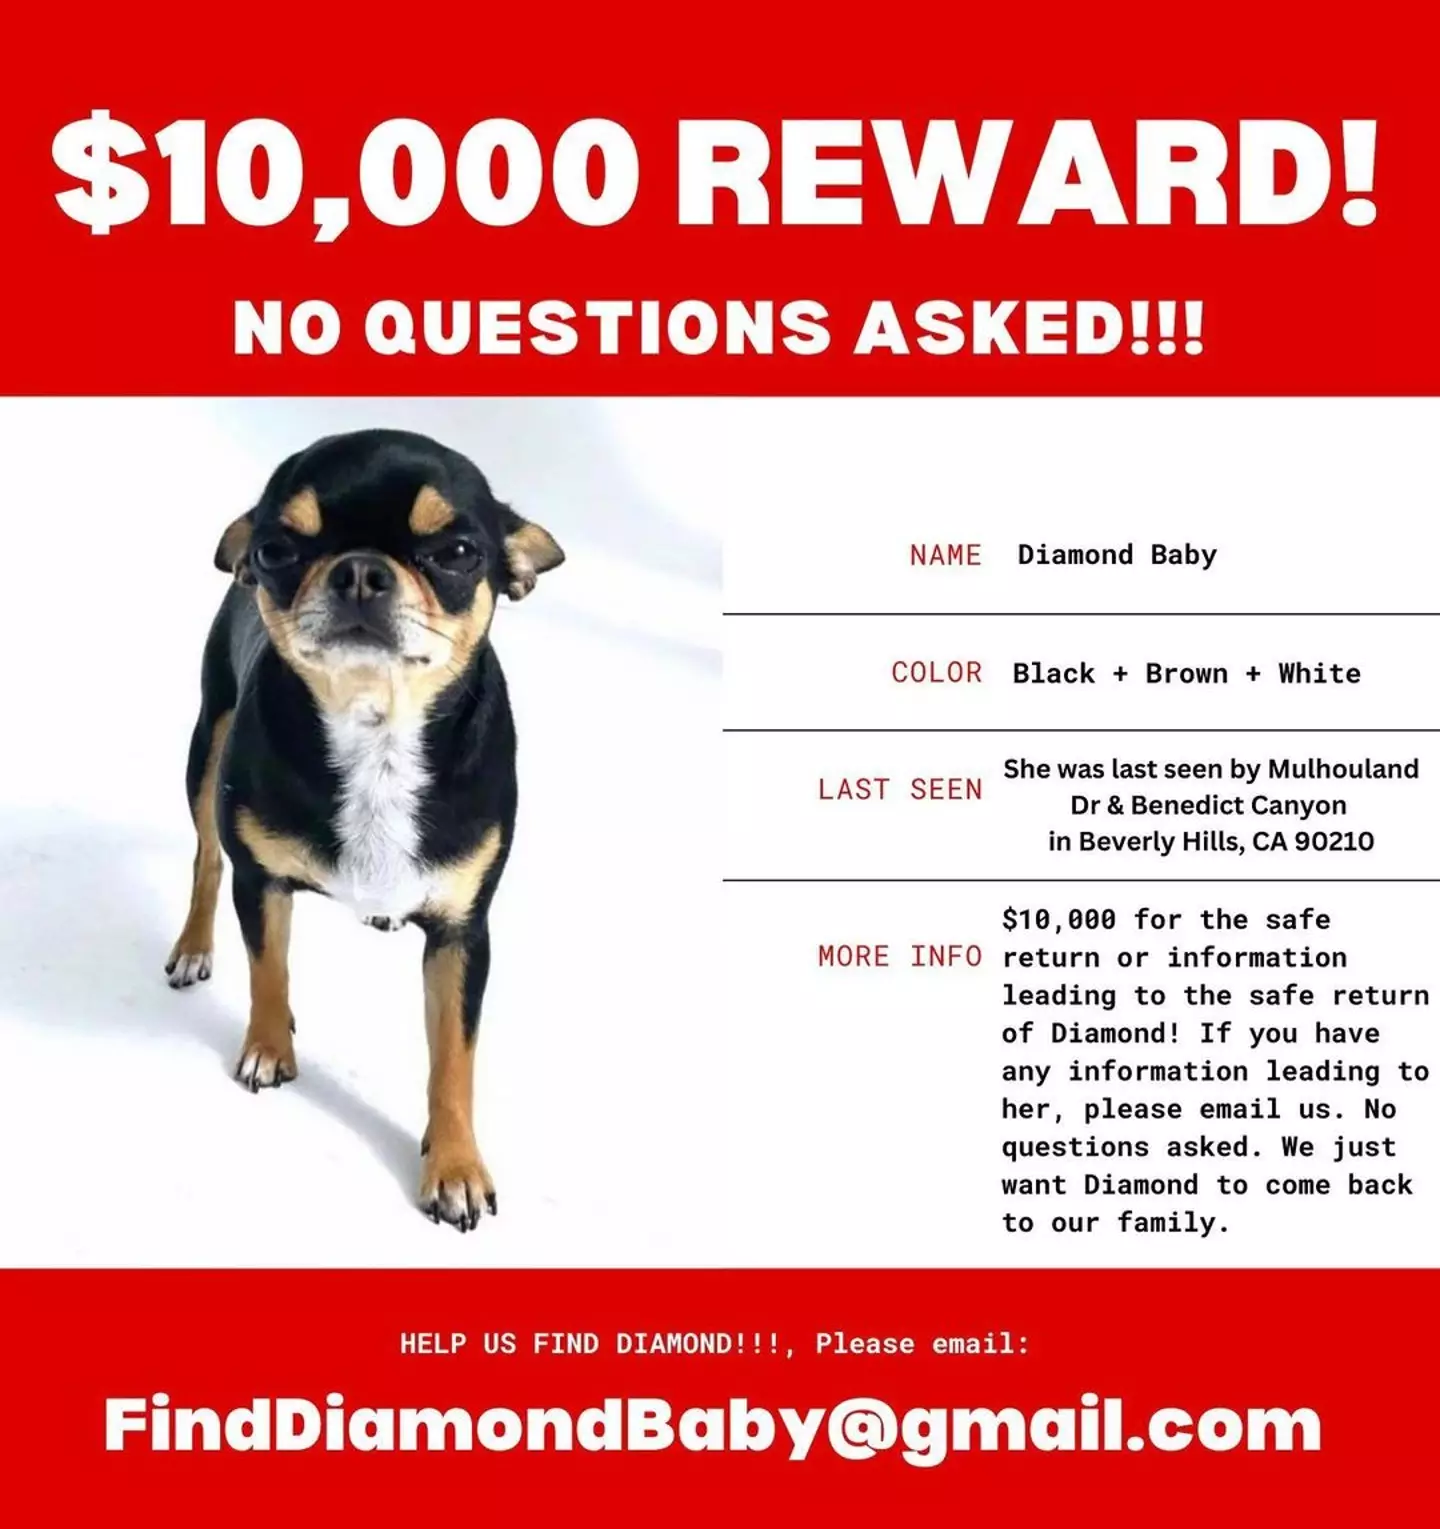 The social media star is offering $10,000 to anyone who can help to find Diamond Baby.